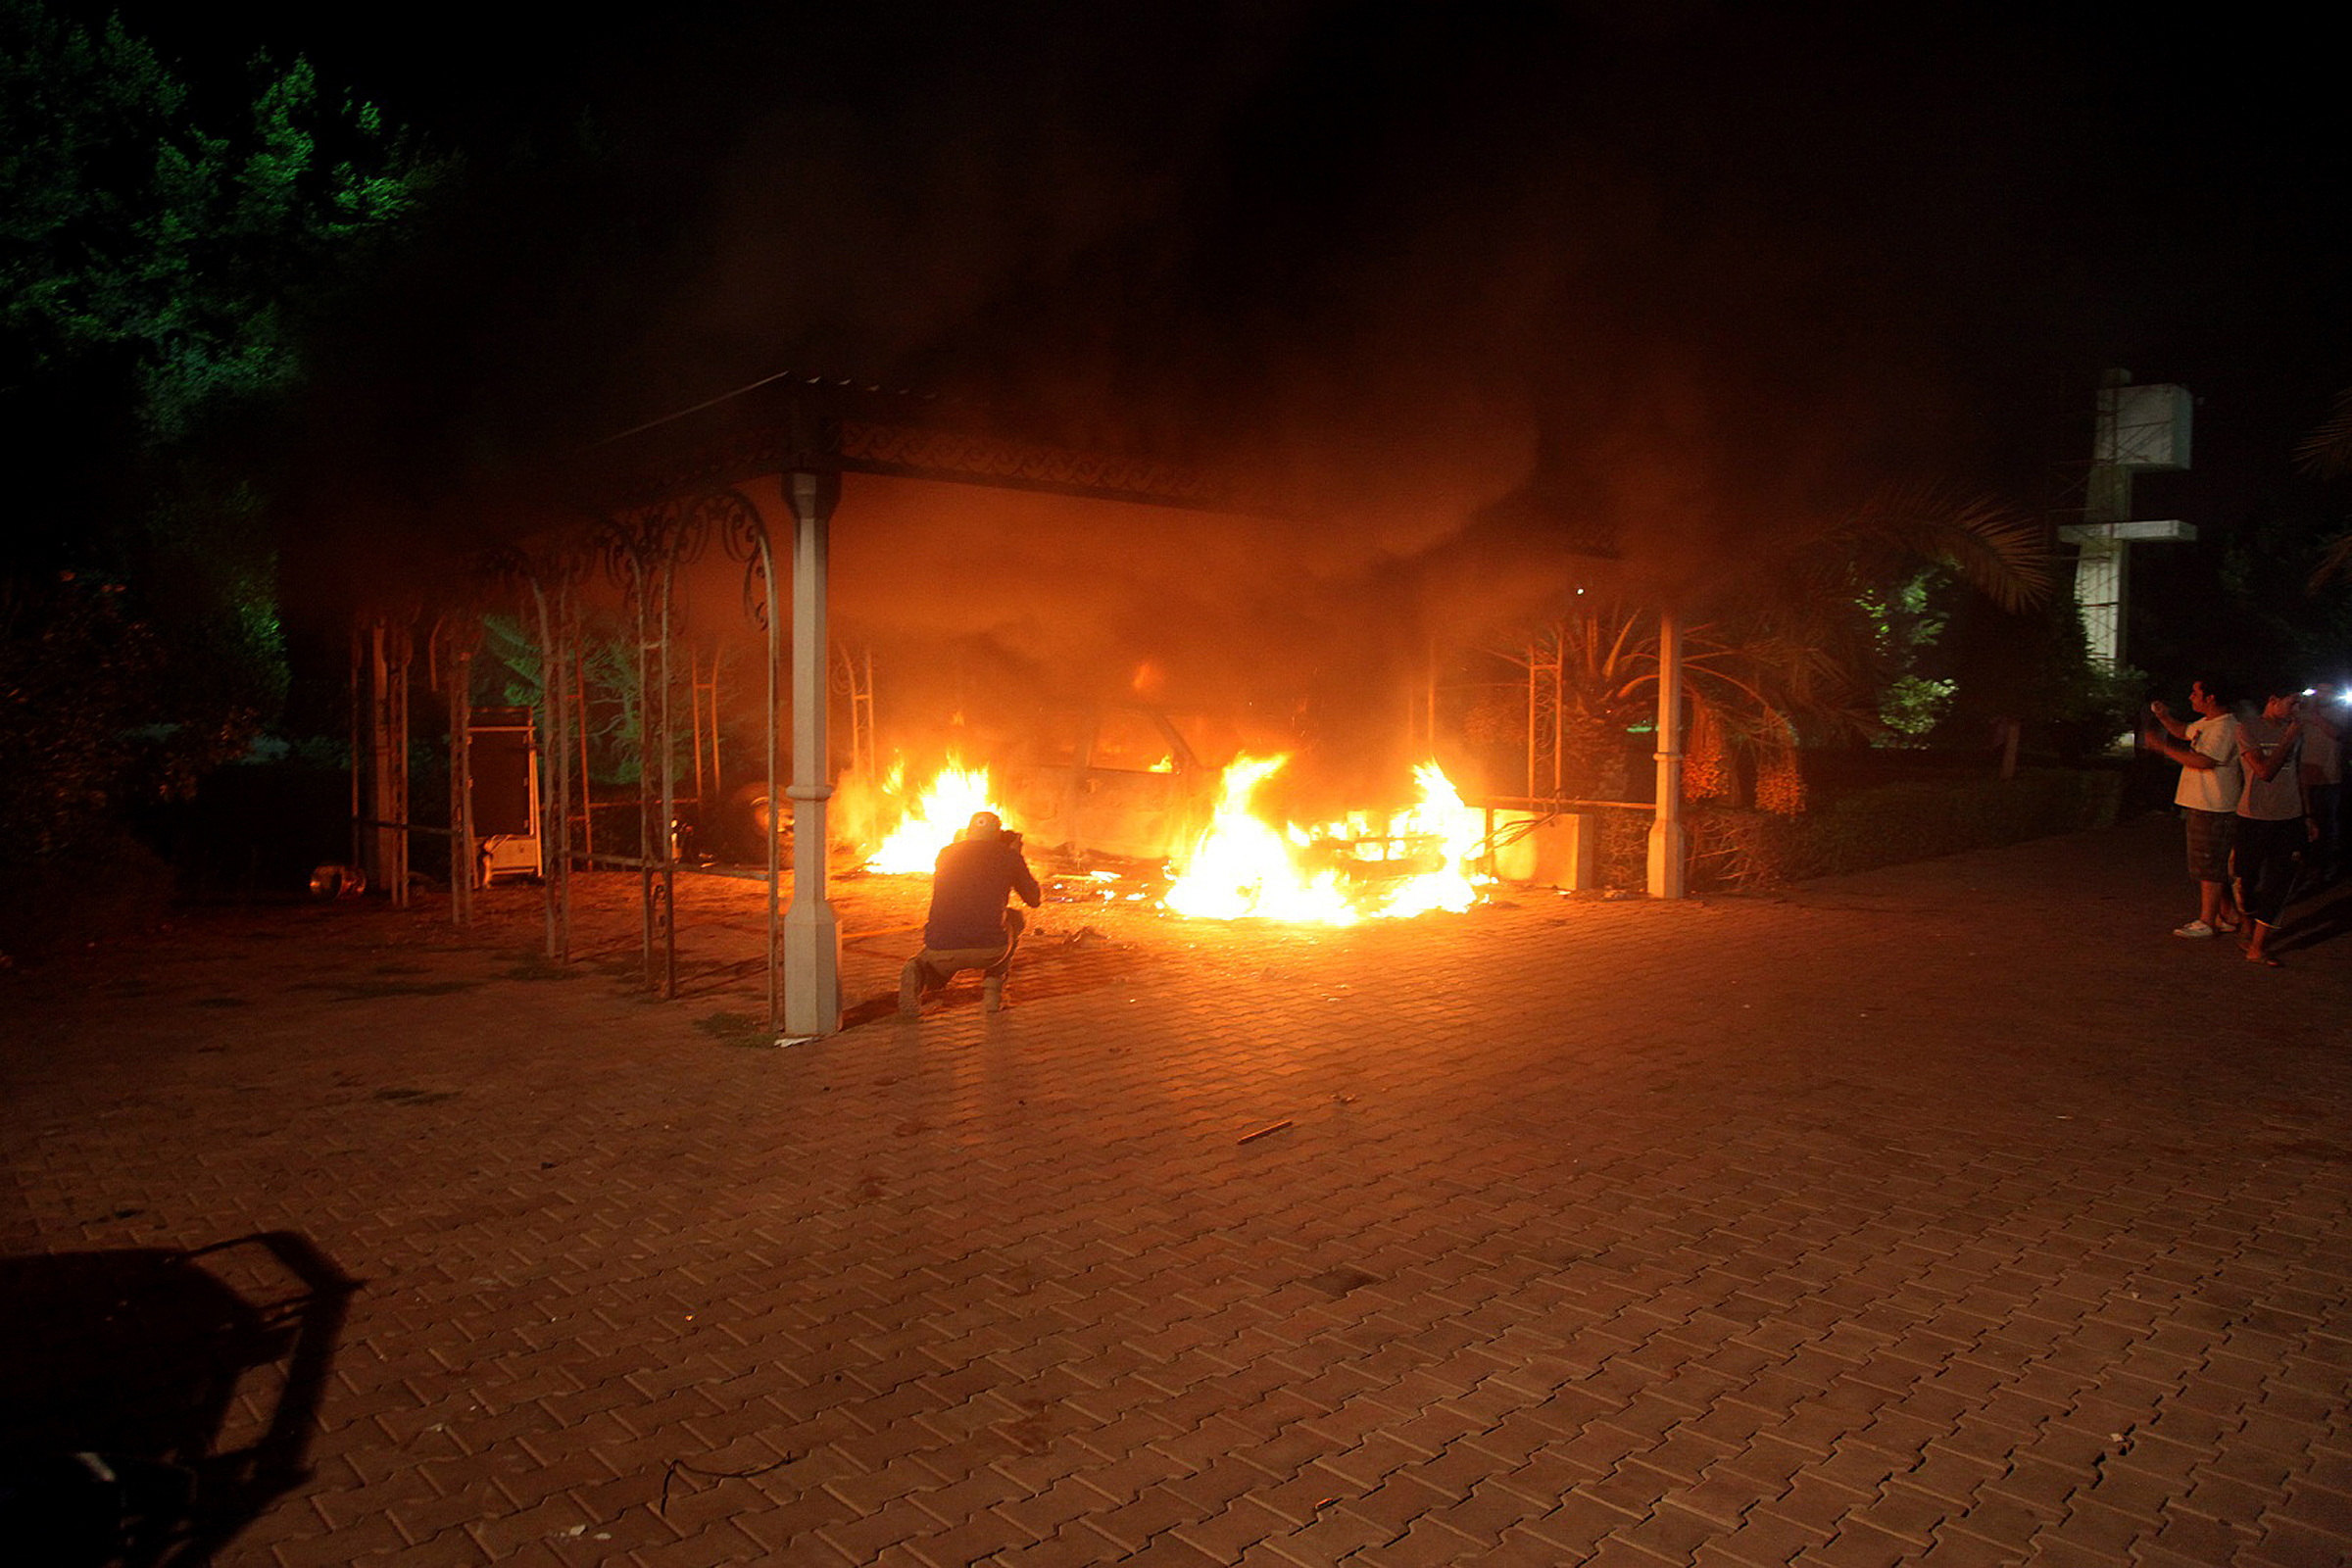 Man questioned in Libya over Benghazi attack - CBS News2400 x 1600